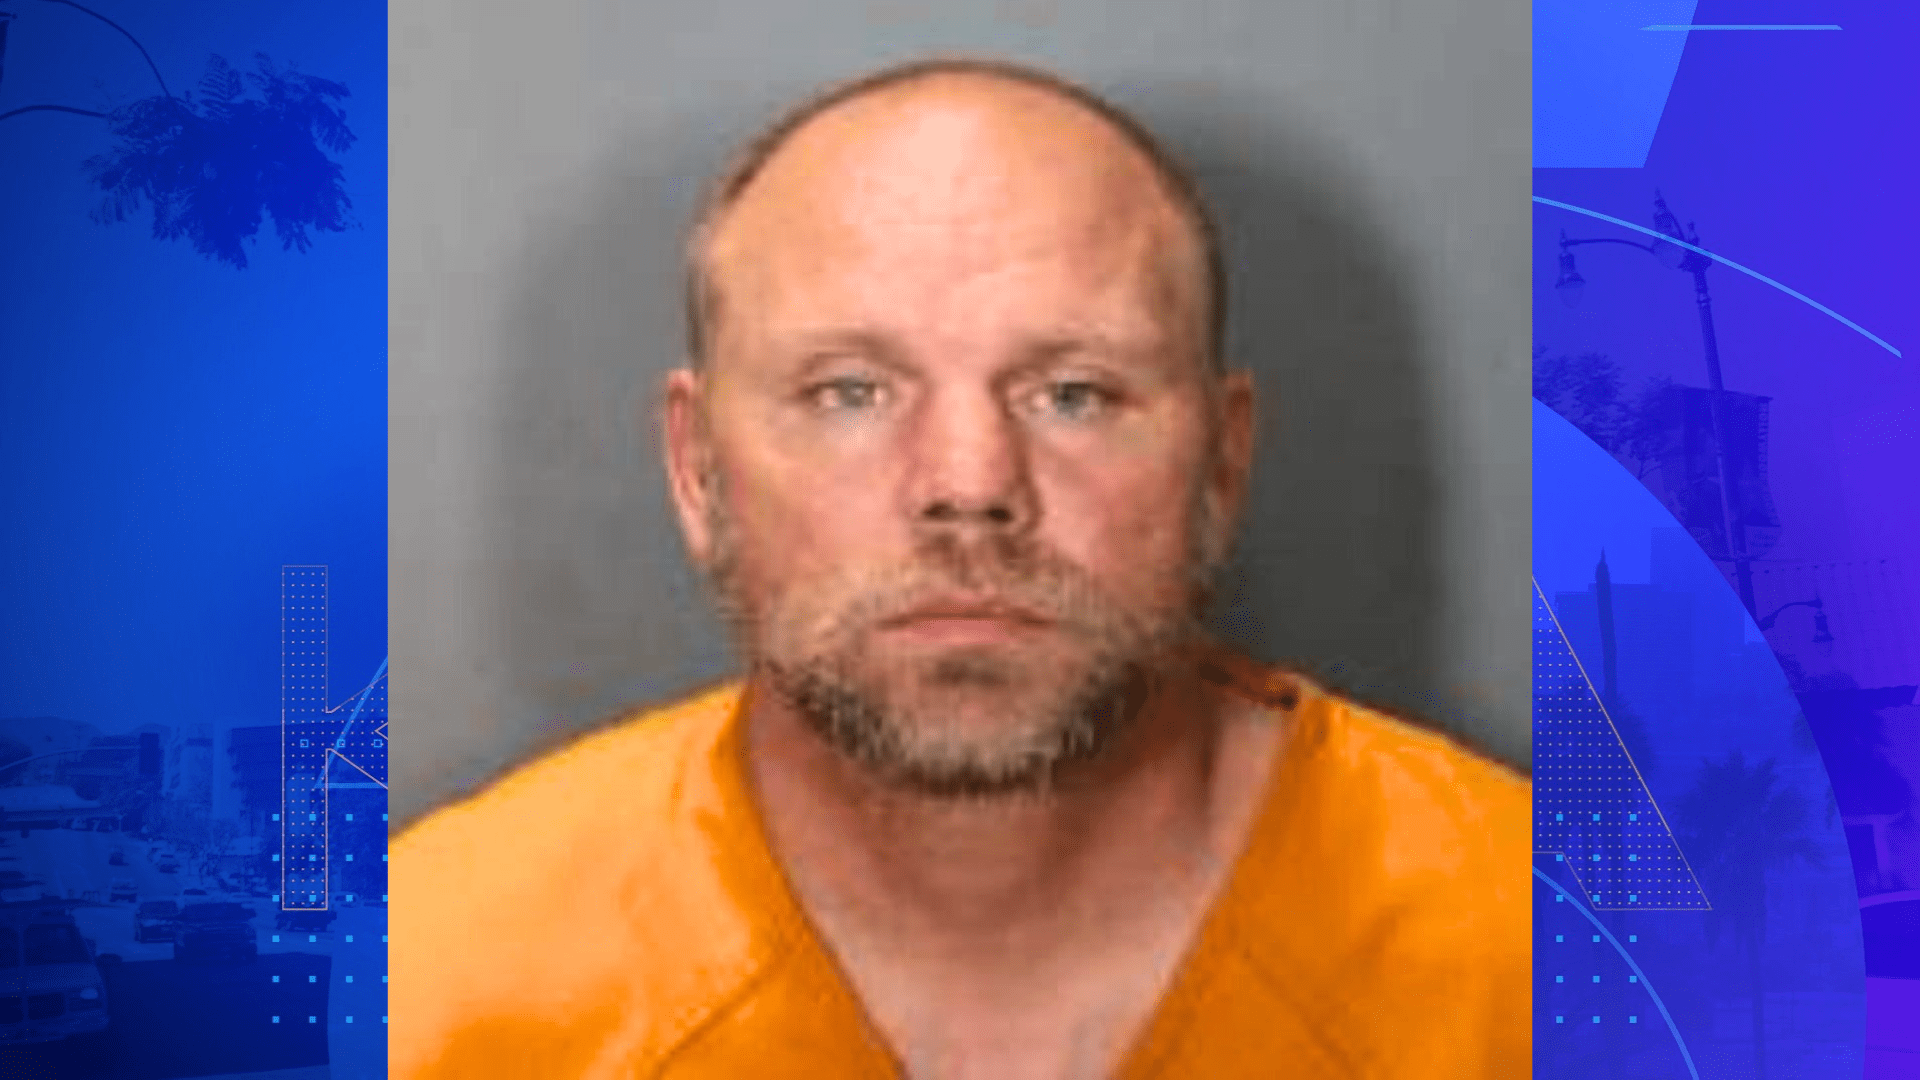 Thomas Avery Hillman, Jr., 44, in a booking photo from the Orange County Sheriff’s Department.